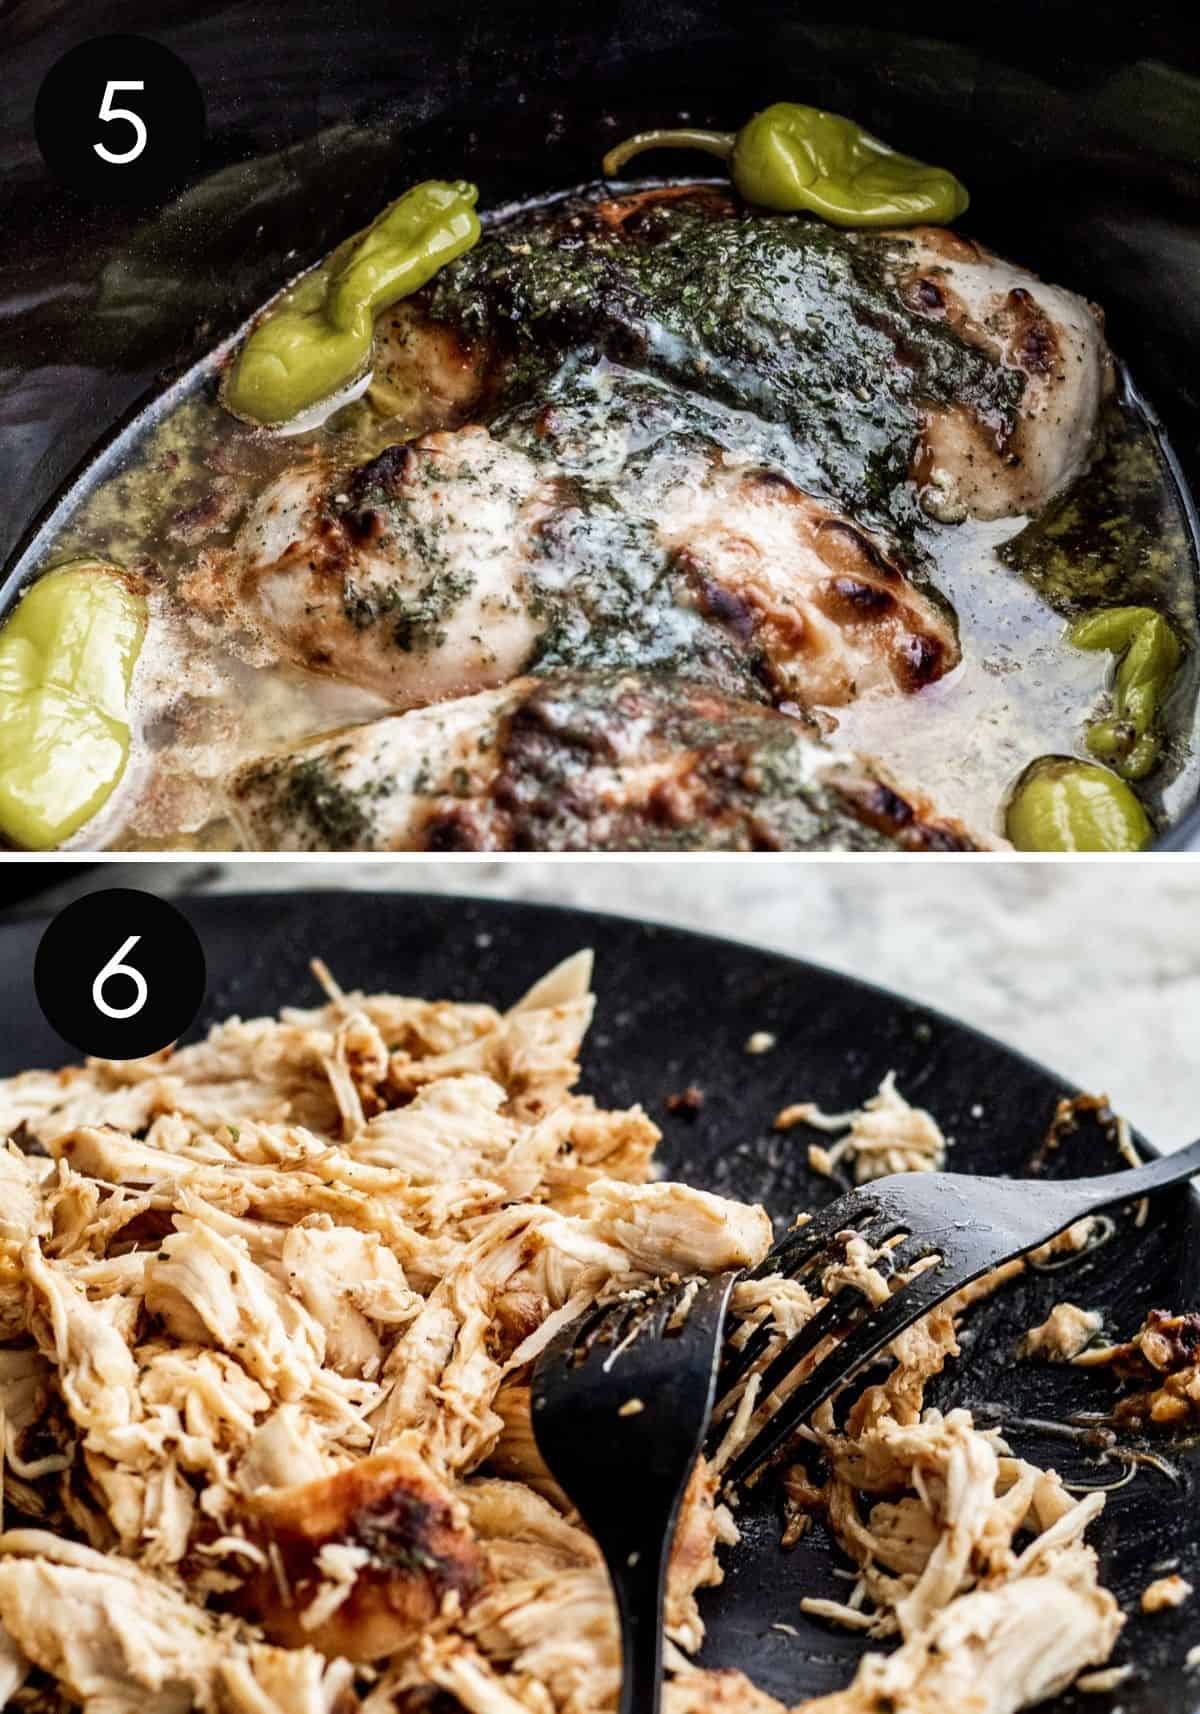 Cooked chicken in crockpot then being shredded on black plate with forks.